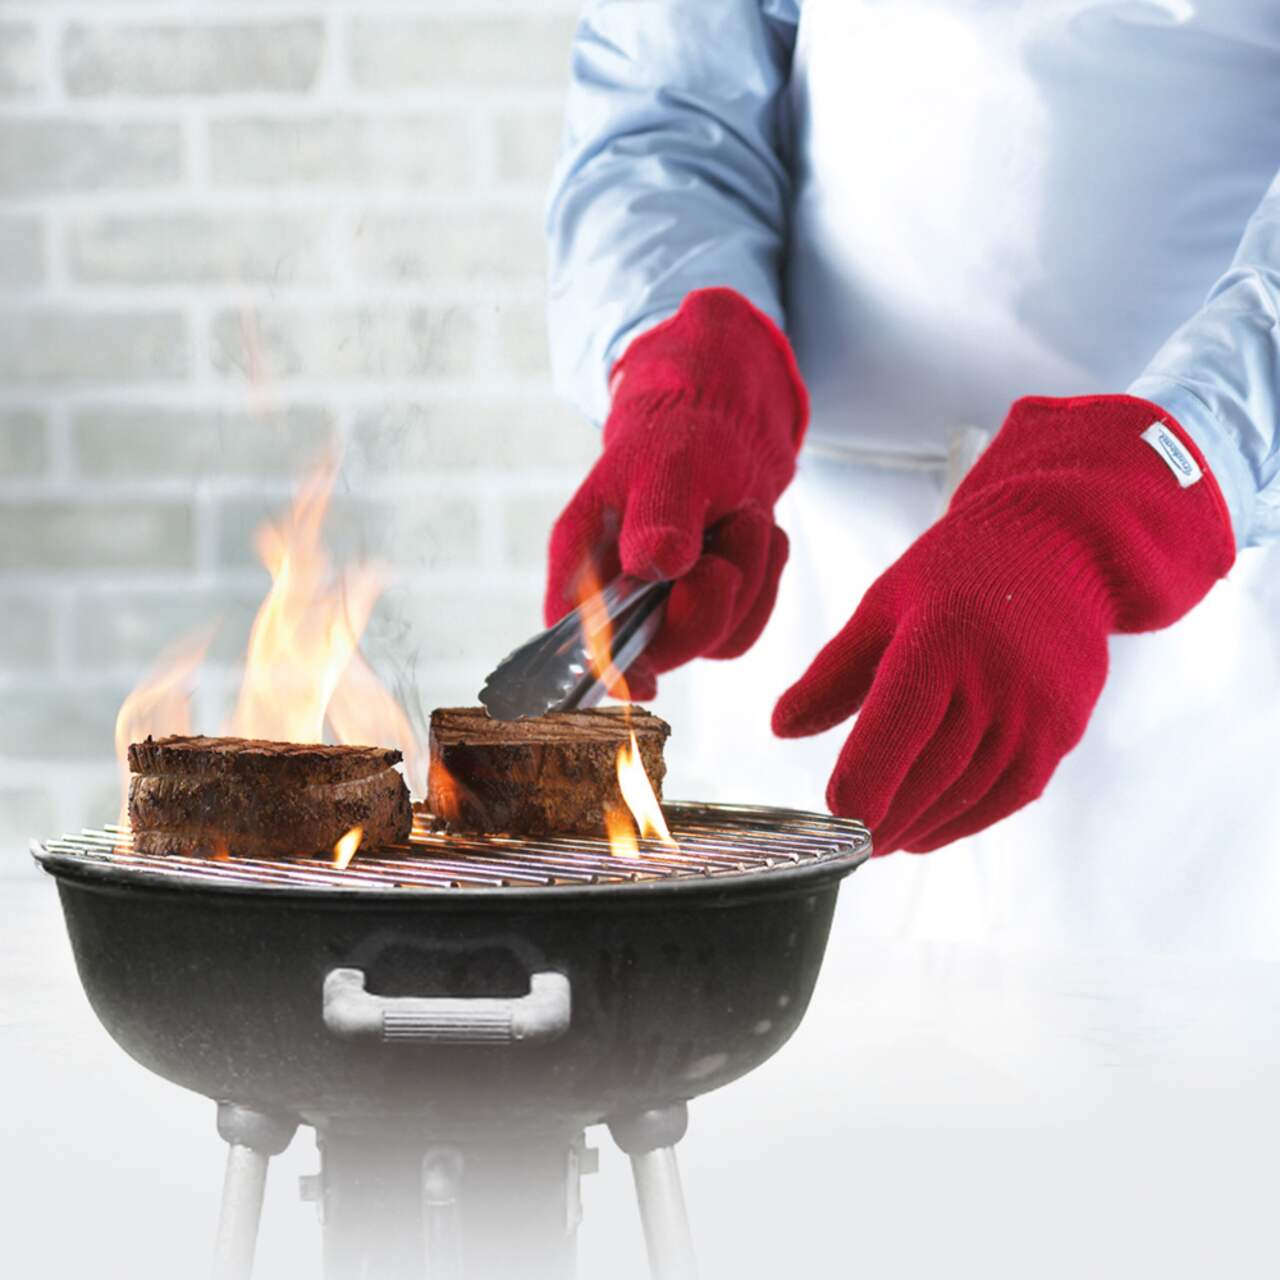 https://media-www.canadiantire.ca/product/living/kitchen/dining-and-entertaining/1421473/2-piece-oven-gloves-79295c1c-f144-4d93-8ada-eae19a999fa6.png?imdensity=1&imwidth=1244&impolicy=mZoom